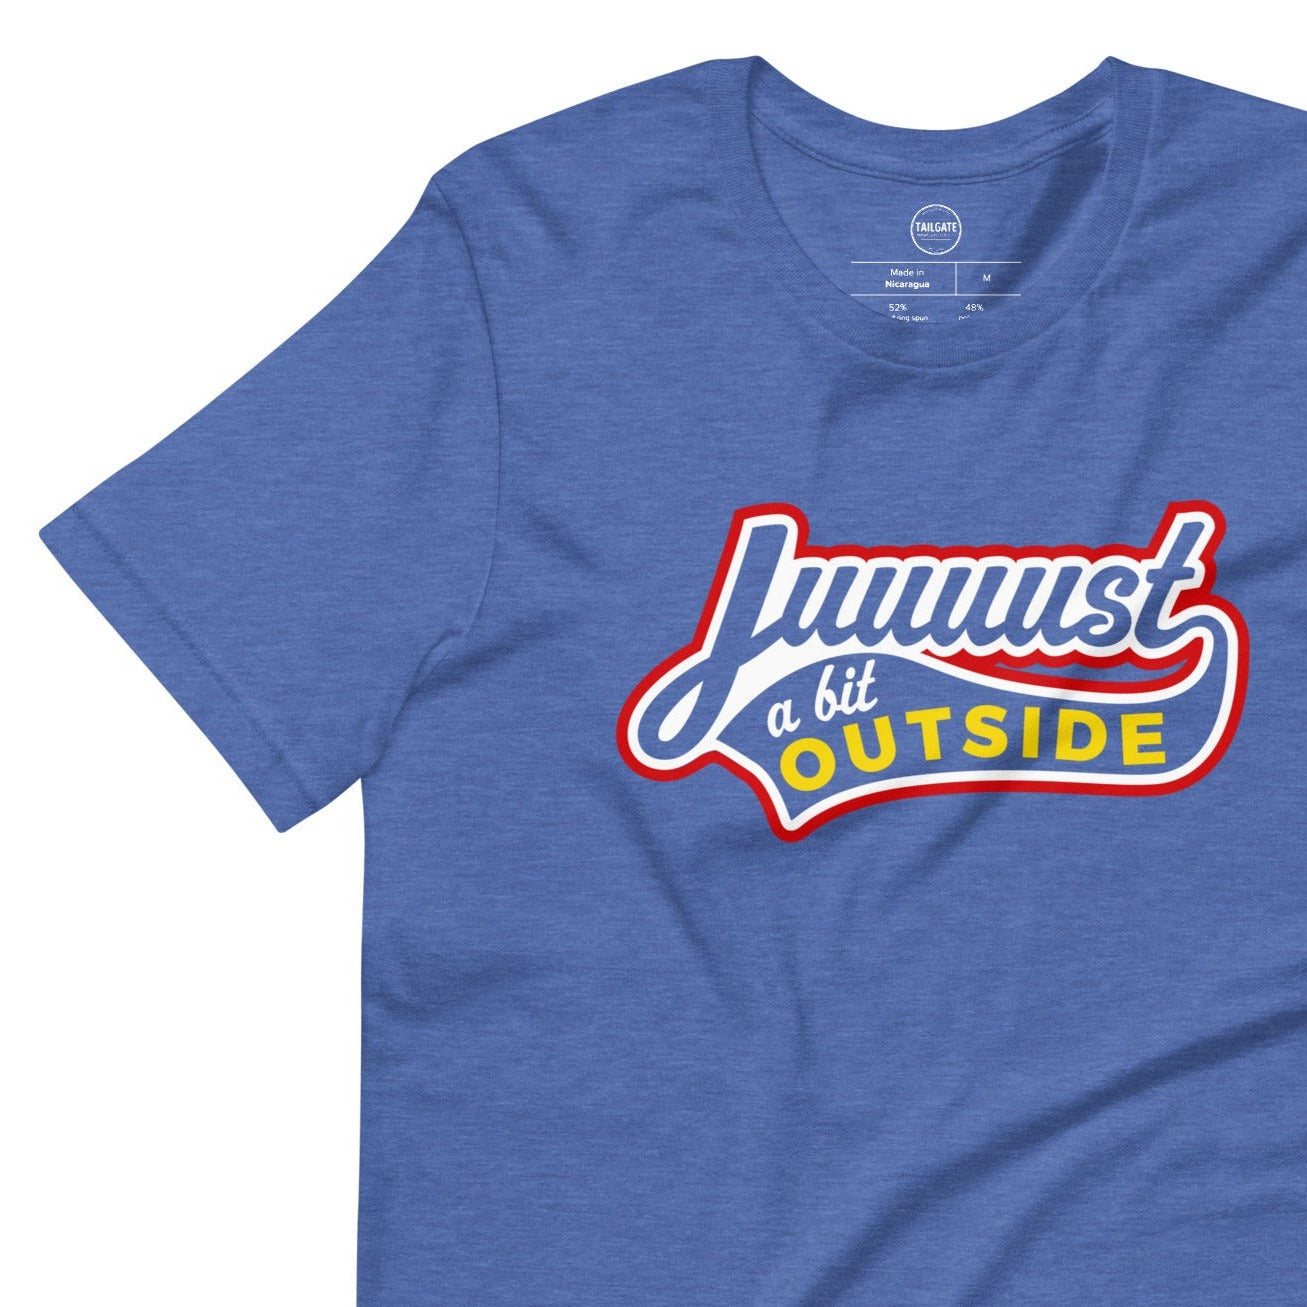 Image of heather royal blue t-shirt with design of "Juuuust a bit Outside" in white/red/yellow located on centre chest. Just a Bit Outside is an homage to the great baseball movie "Major League". This design is exclusive to Tailgate Mercantile and available only online.